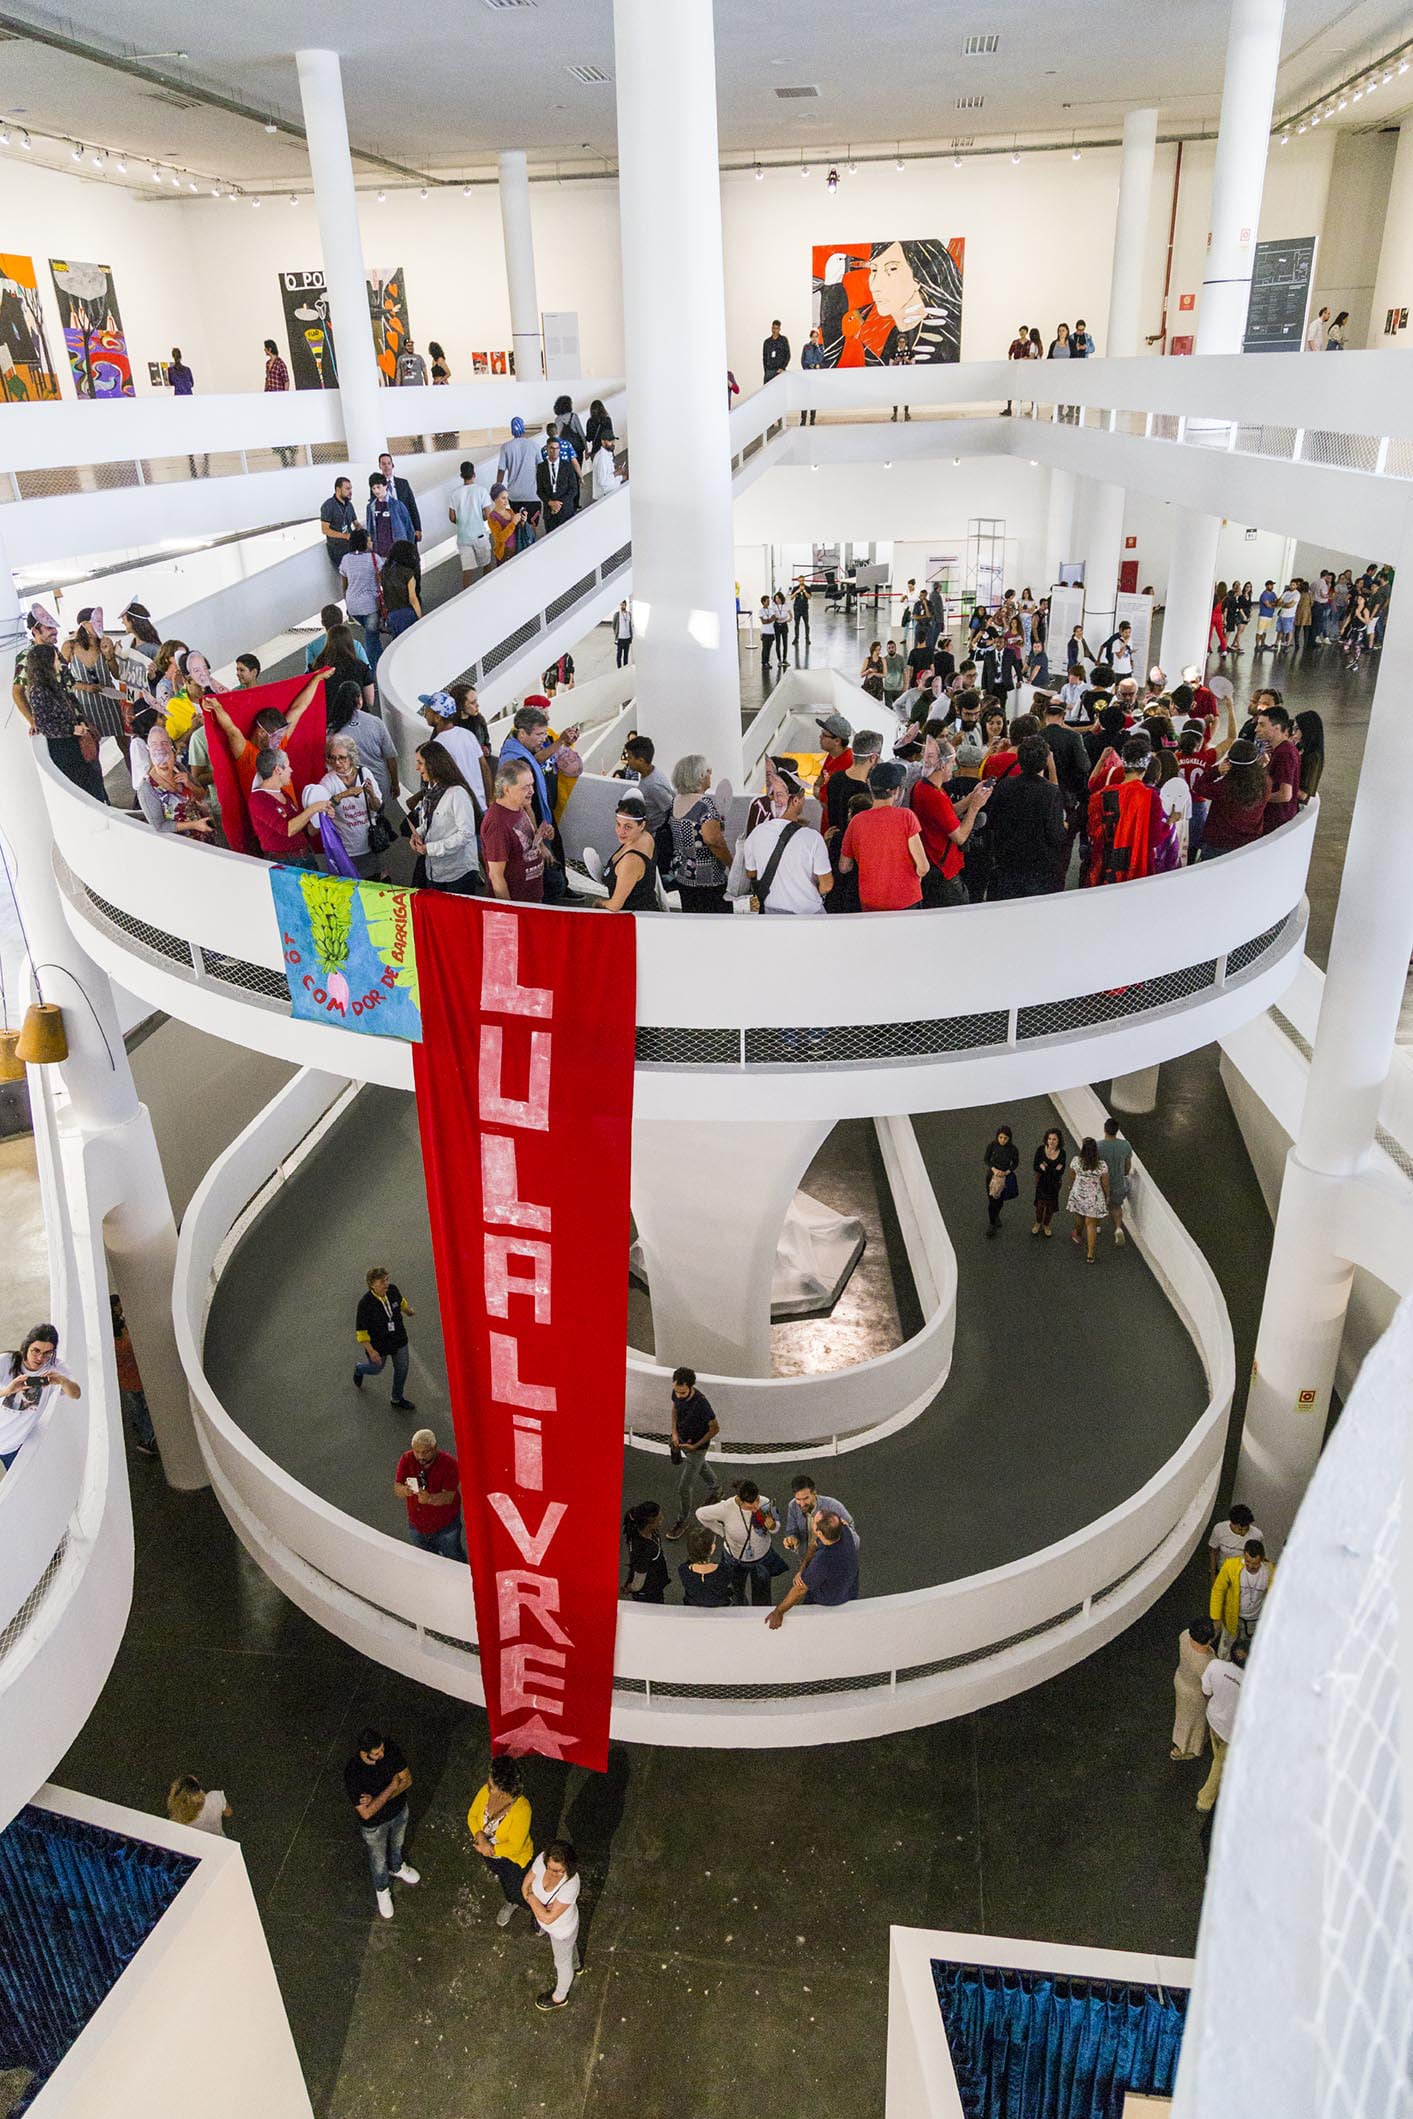 Image 05: ‘Manifestation in favor of Lula’s freedom at the opening of the Bienial, Coletivo Aparelhamento', 7 September 2018. Credit: Ding Musa.